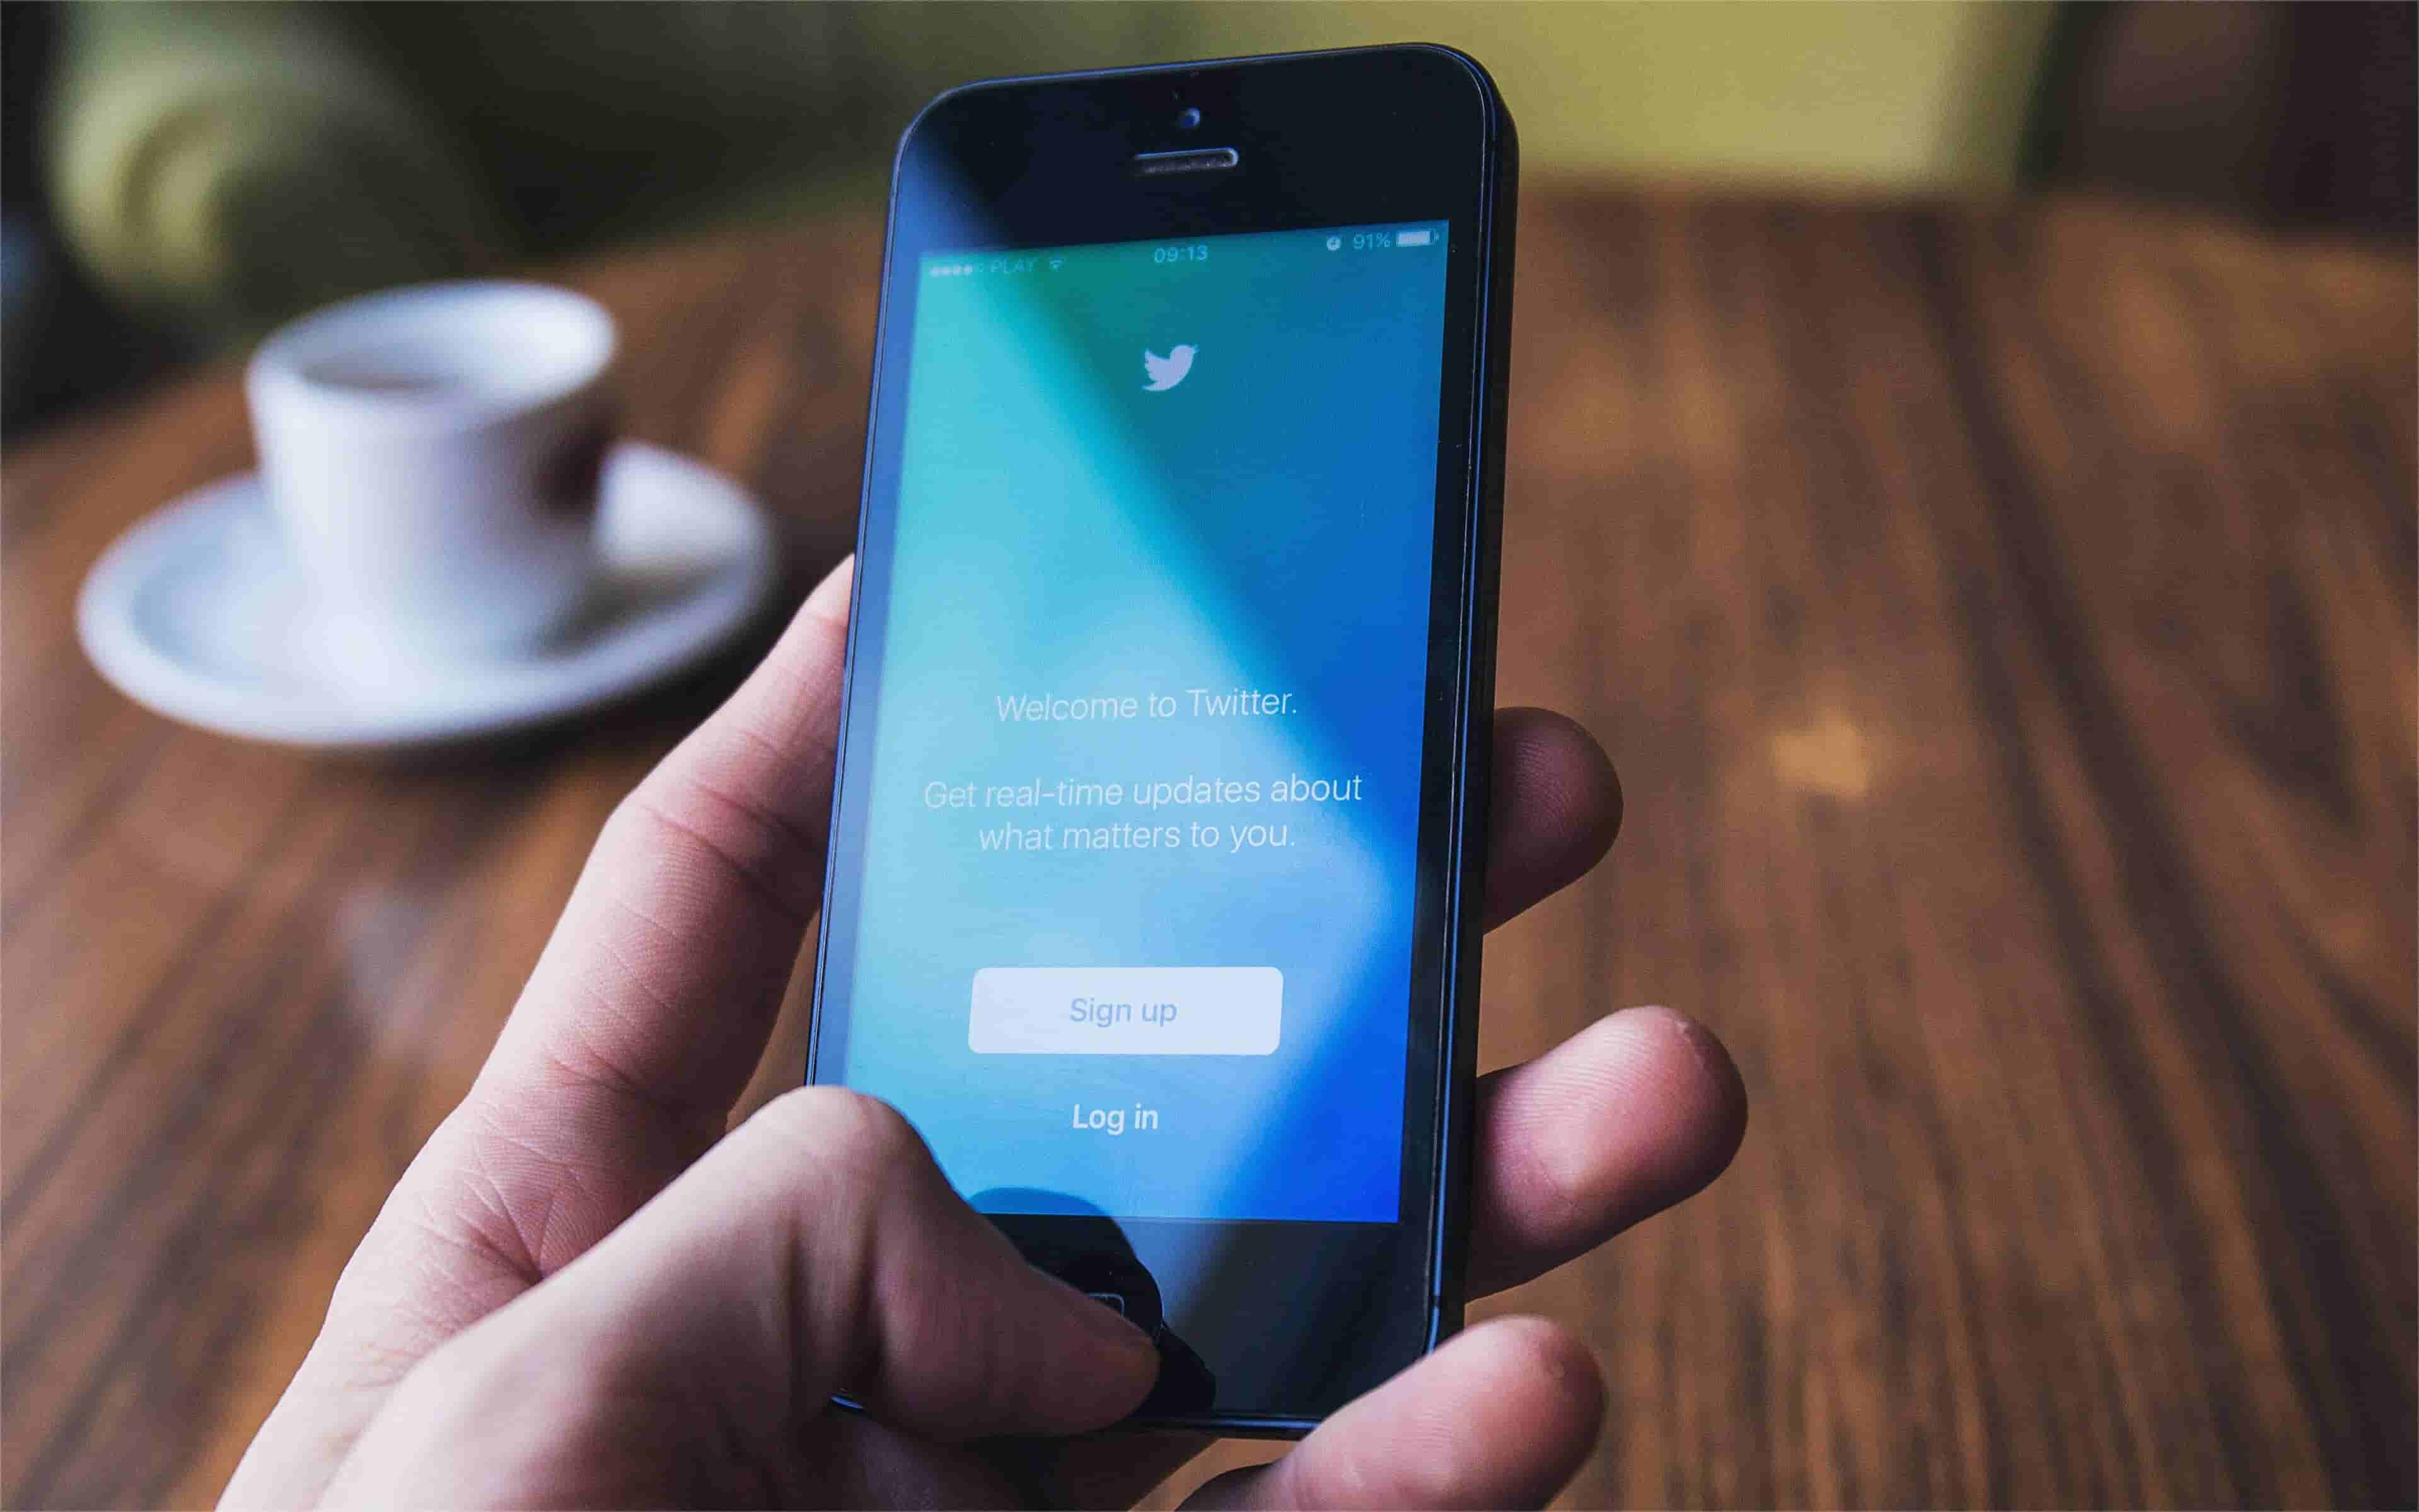 The phone shows Twitter login page.